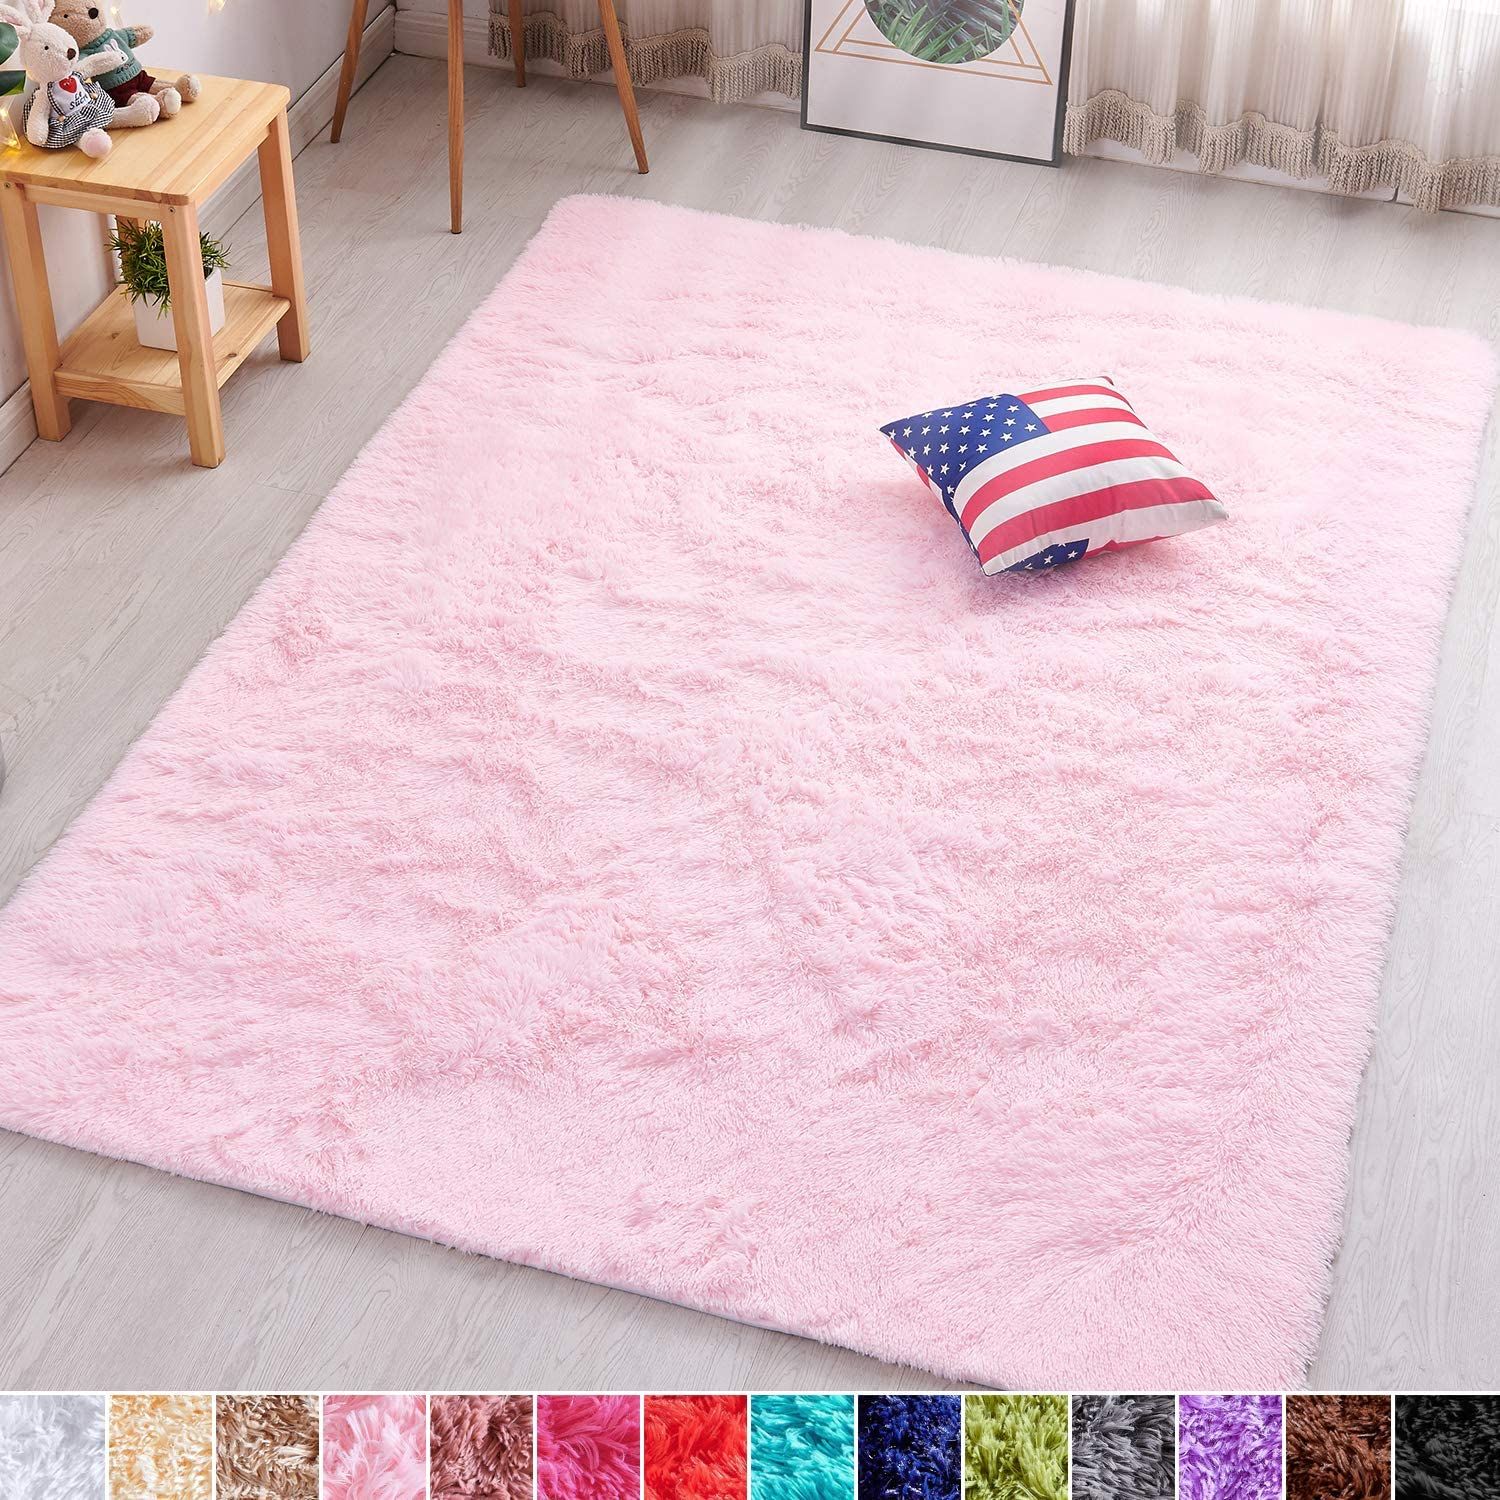 Pagisofe Pink Fluffy Shag Area Rugs For Bedroom 5x7, Soft Fuzzy Shaggy Rugs  For Living Room Carpet Nursery Floor Girls Room Dorm Rug – Walmart With Regard To Light Pink Rugs (View 13 of 15)